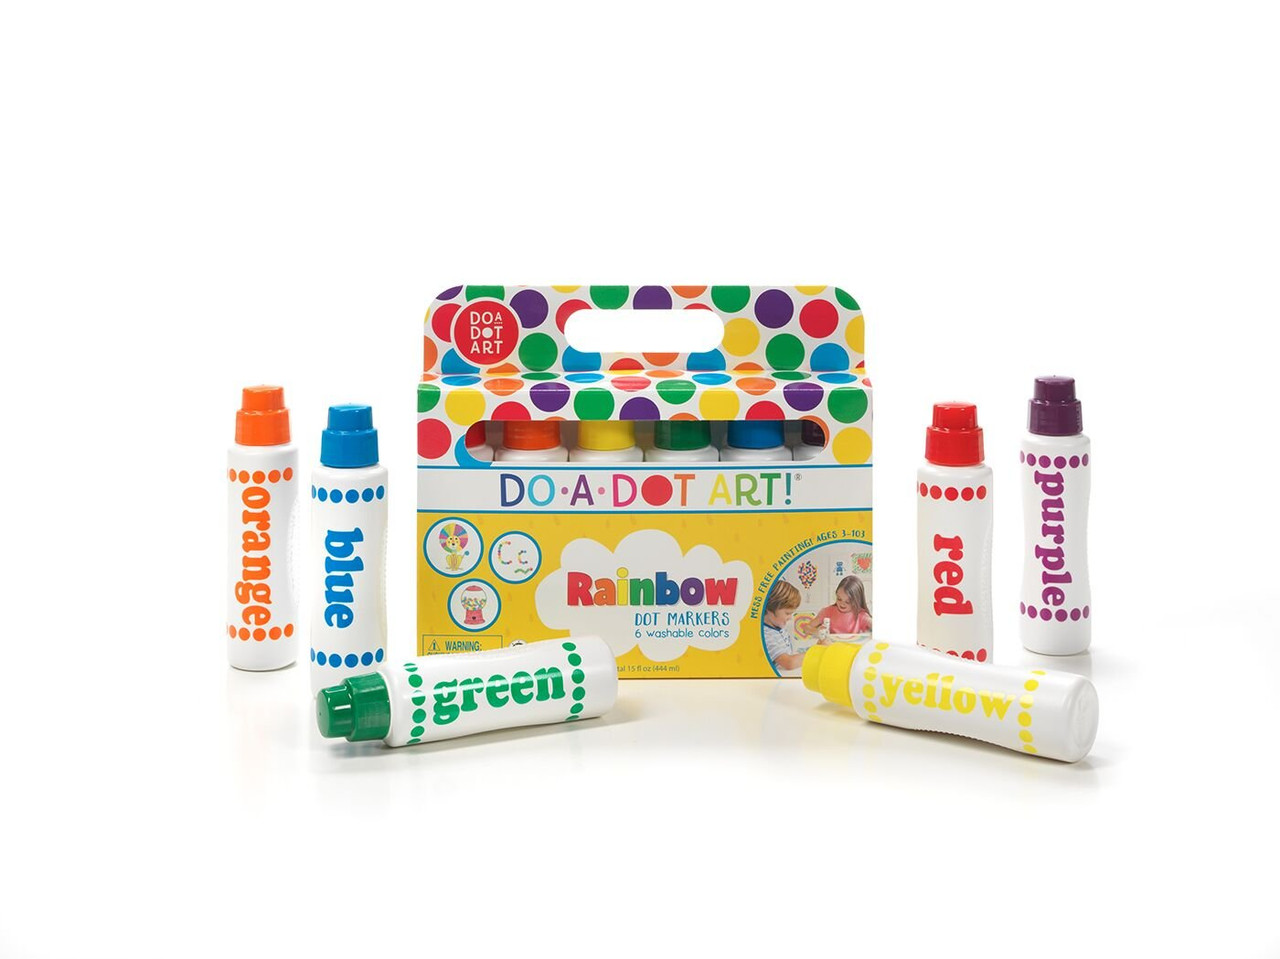 Do-A-Dot Art! Scented Juicy Fruit Dot Markers, Pack of 6